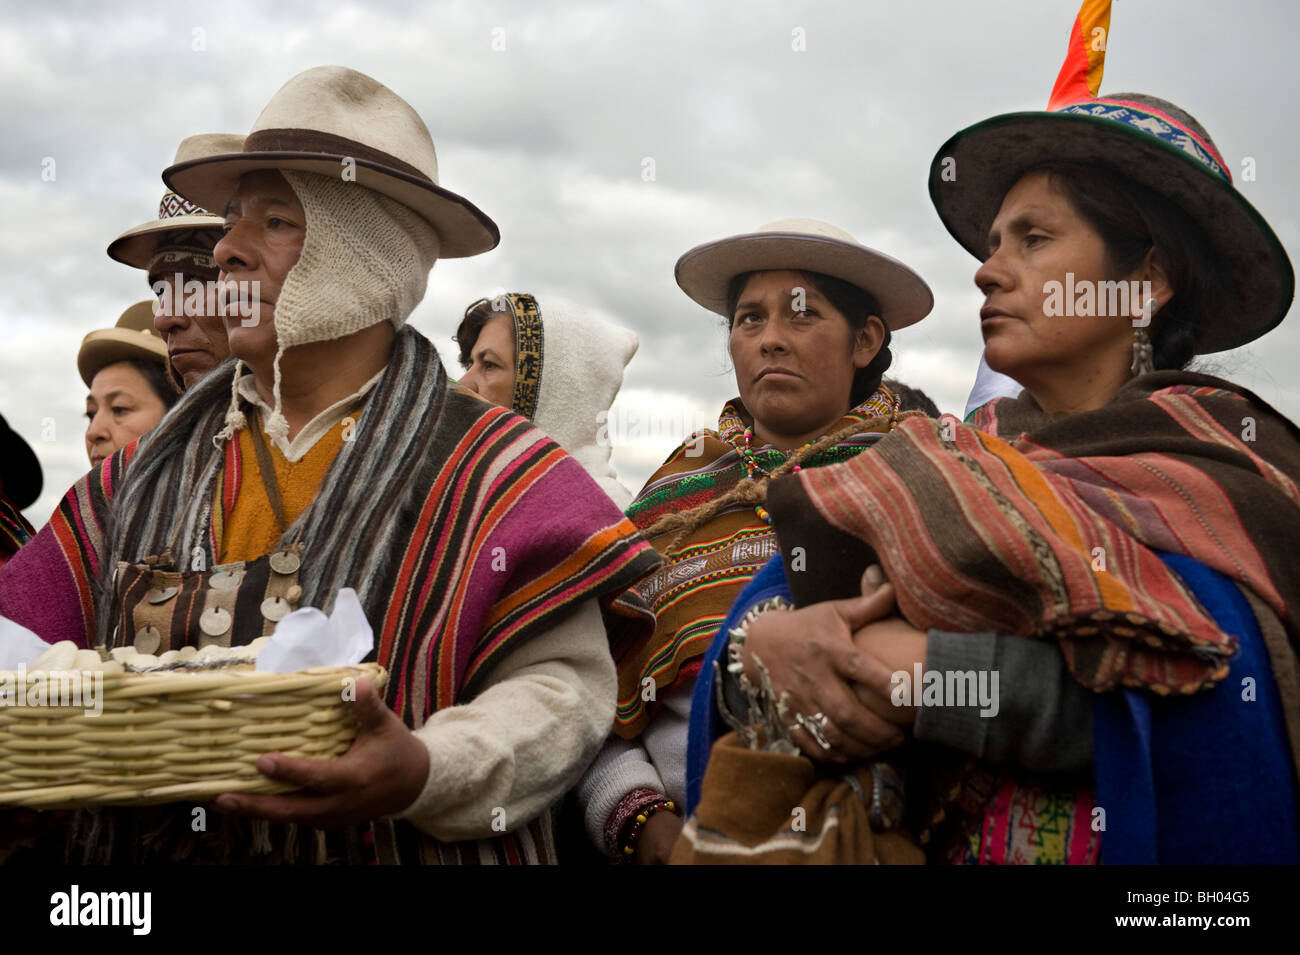 Group Of Aymara People In Traditional Dressing Evo Morales Second